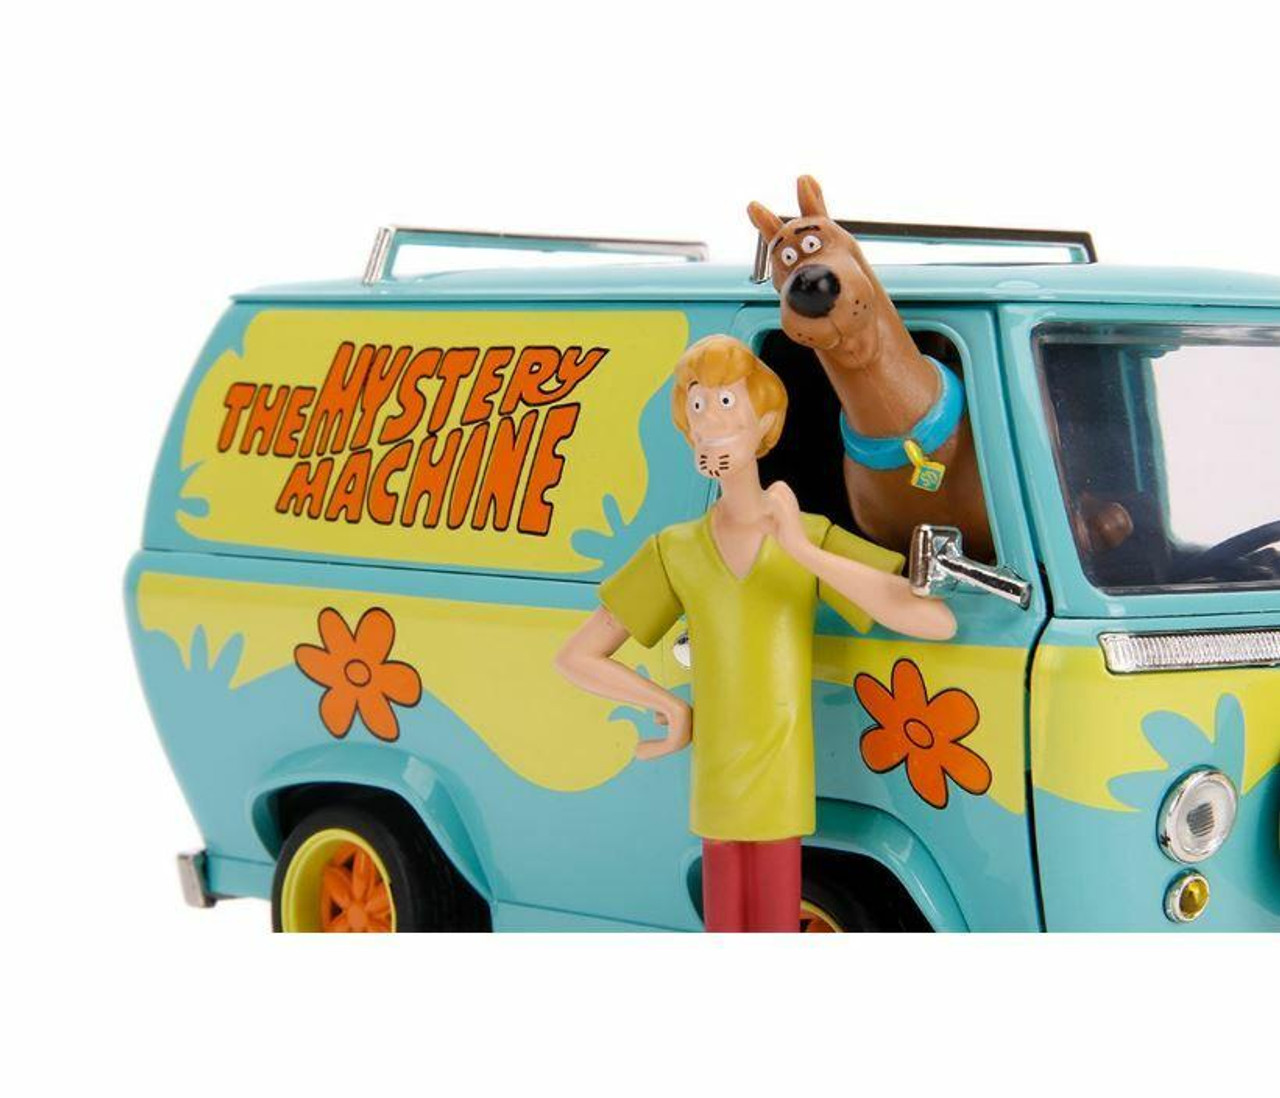 https://cdn11.bigcommerce.com/s-cy4lua1xoh/images/stencil/1280x1280/products/12563/74653/scooby-doo-mystery-machine-with-scooby-and-shaggy-figures-124-die-cast-vehicle-preorder-expected-ship-date-june-2022__64833.1654622671.jpg?c=1?imbypass=on